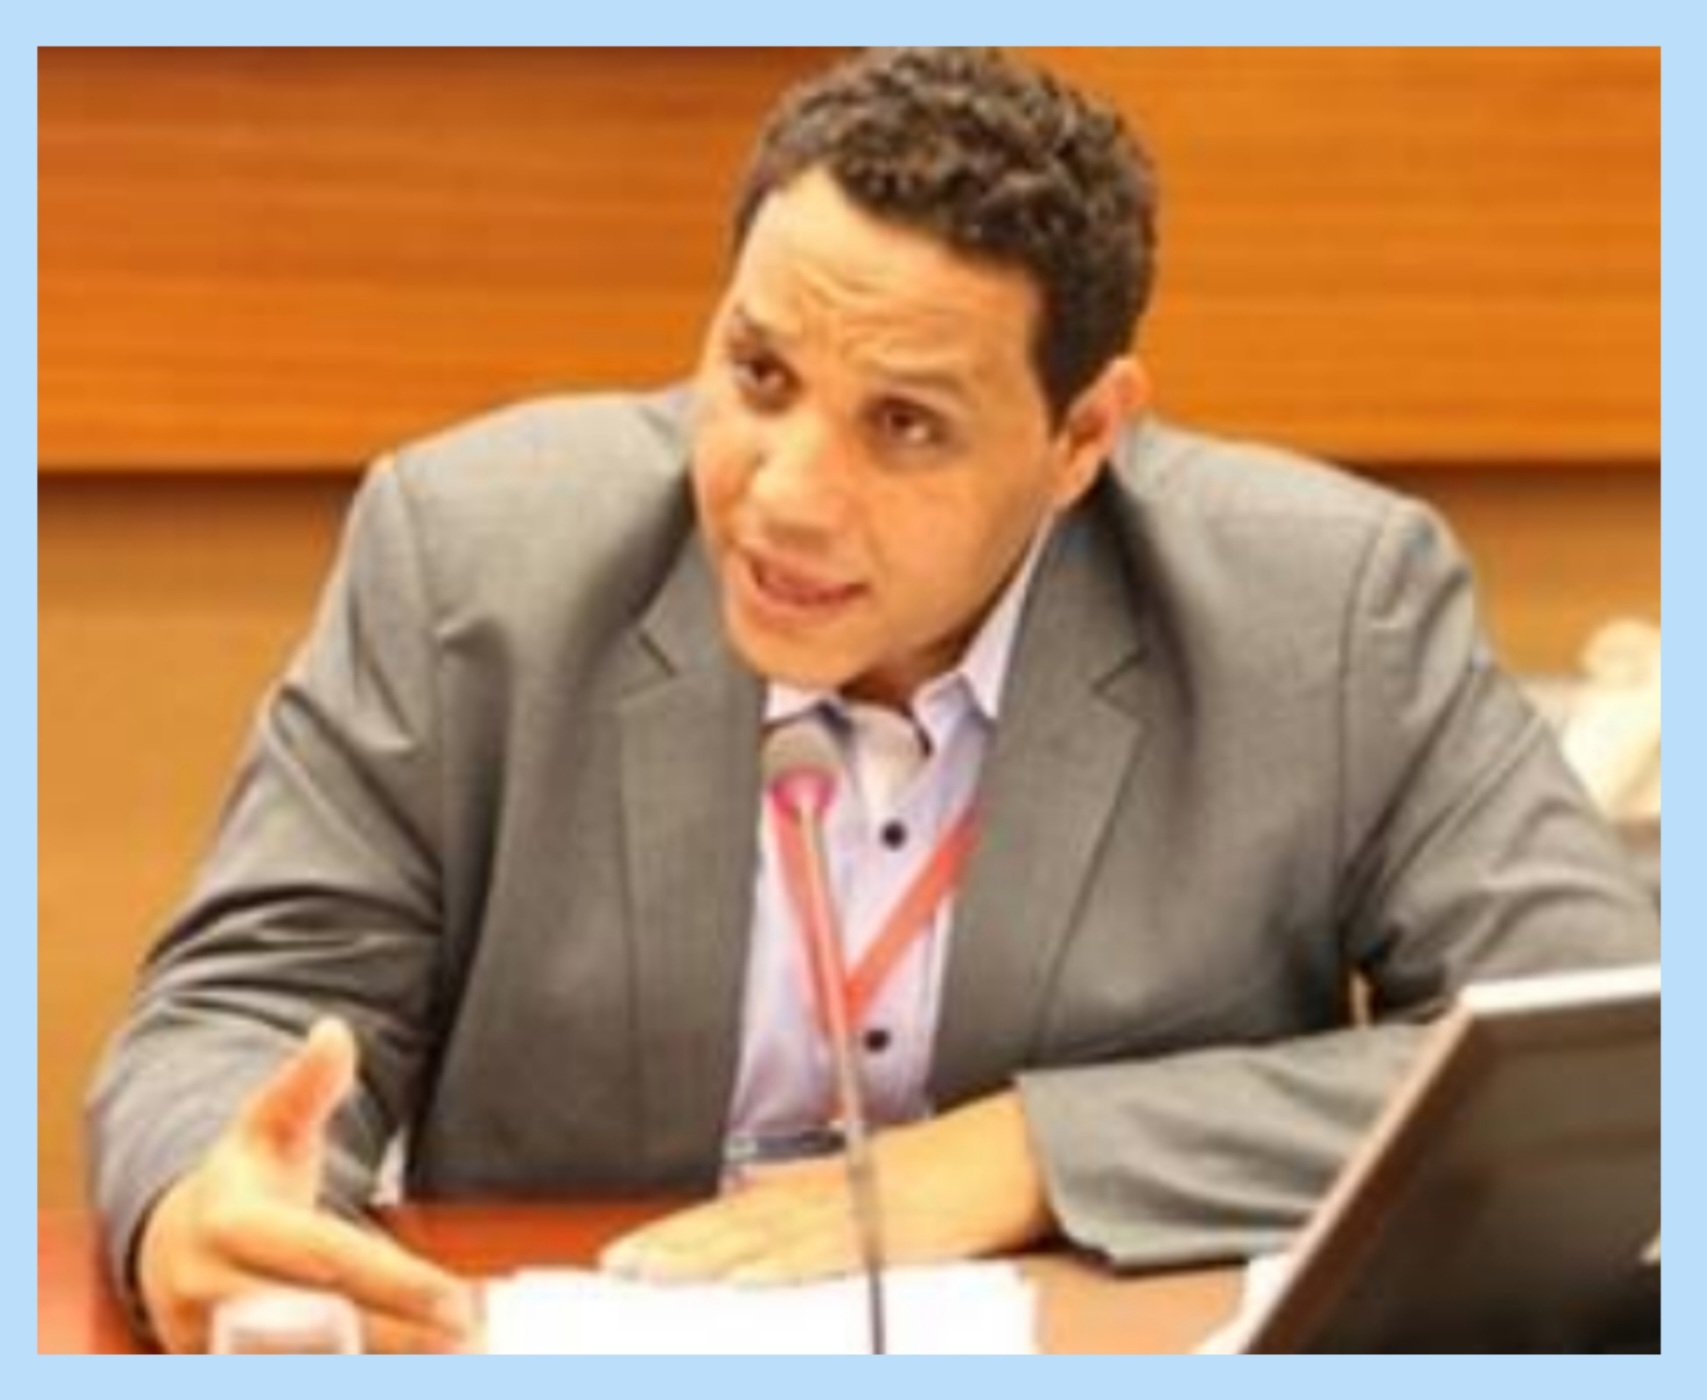  NCHR did not receive any complaints relating to the late Dr. Ayman Hadhoud, says head of NCHR complaints committee 